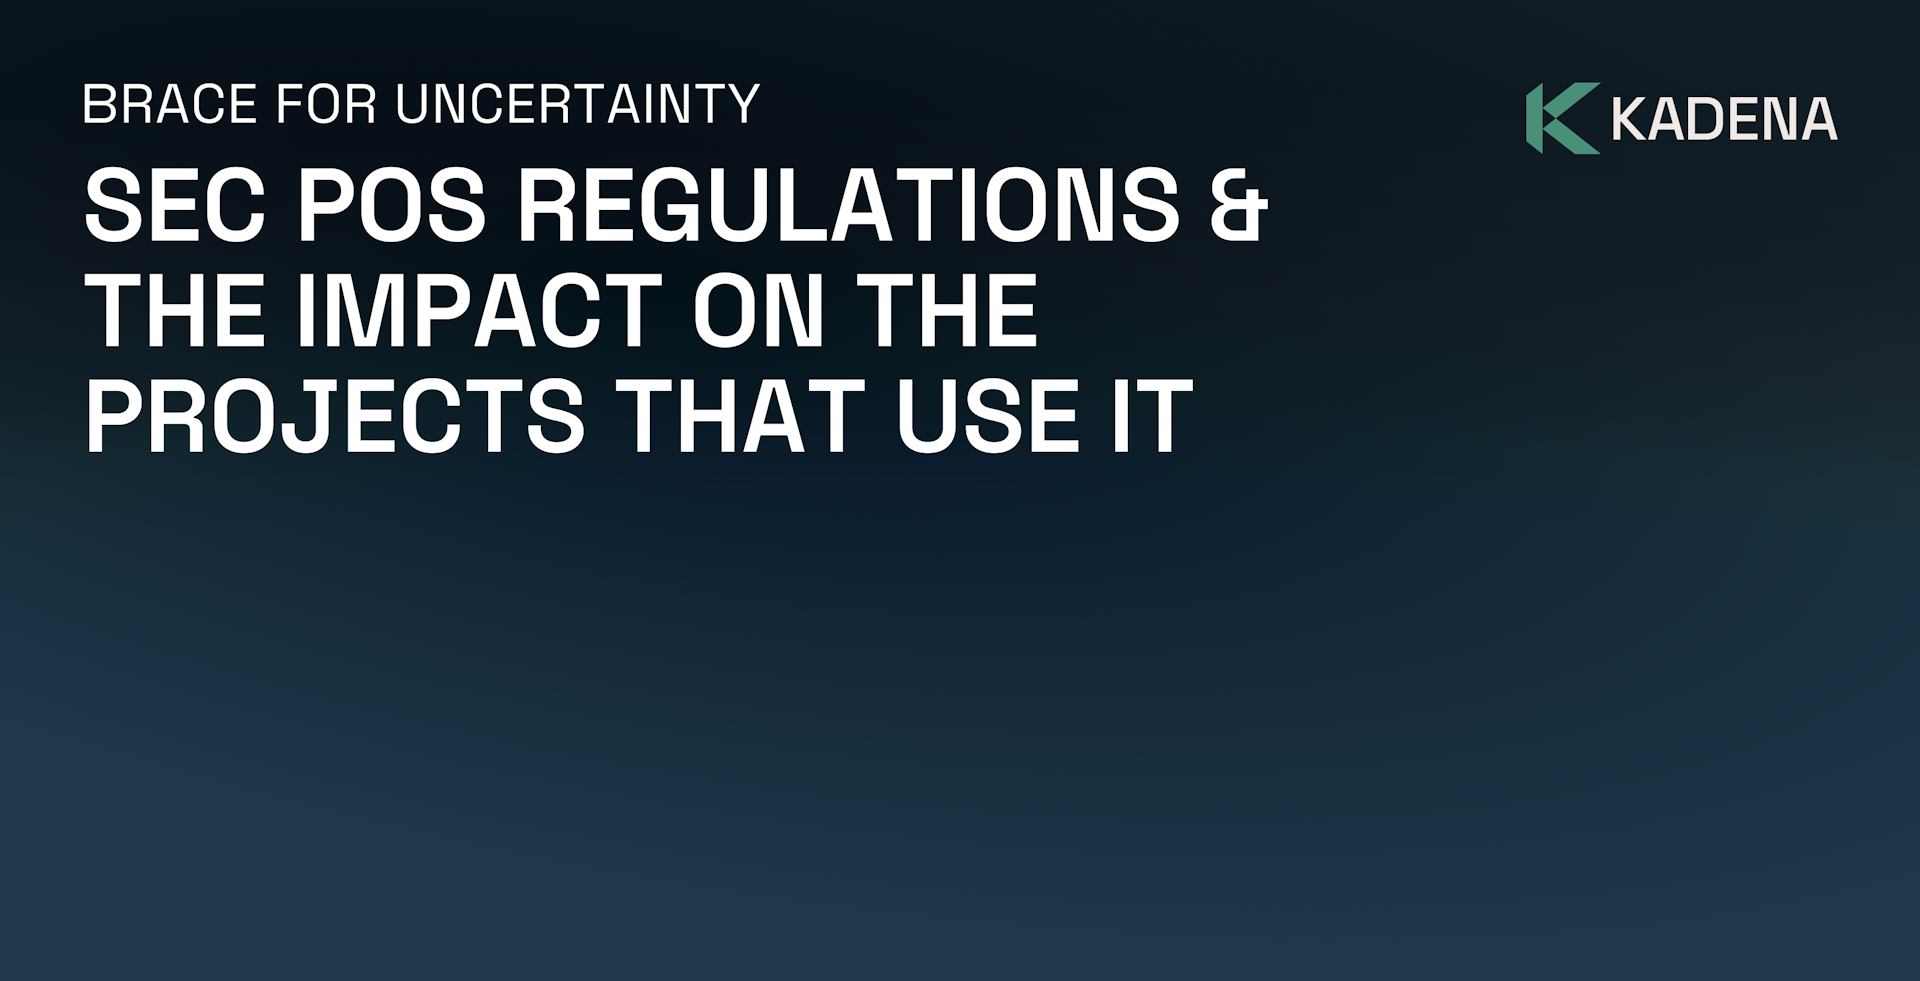 Bracing for Uncertainty: SEC PoS Regulations and The Impact on Projects That Use It